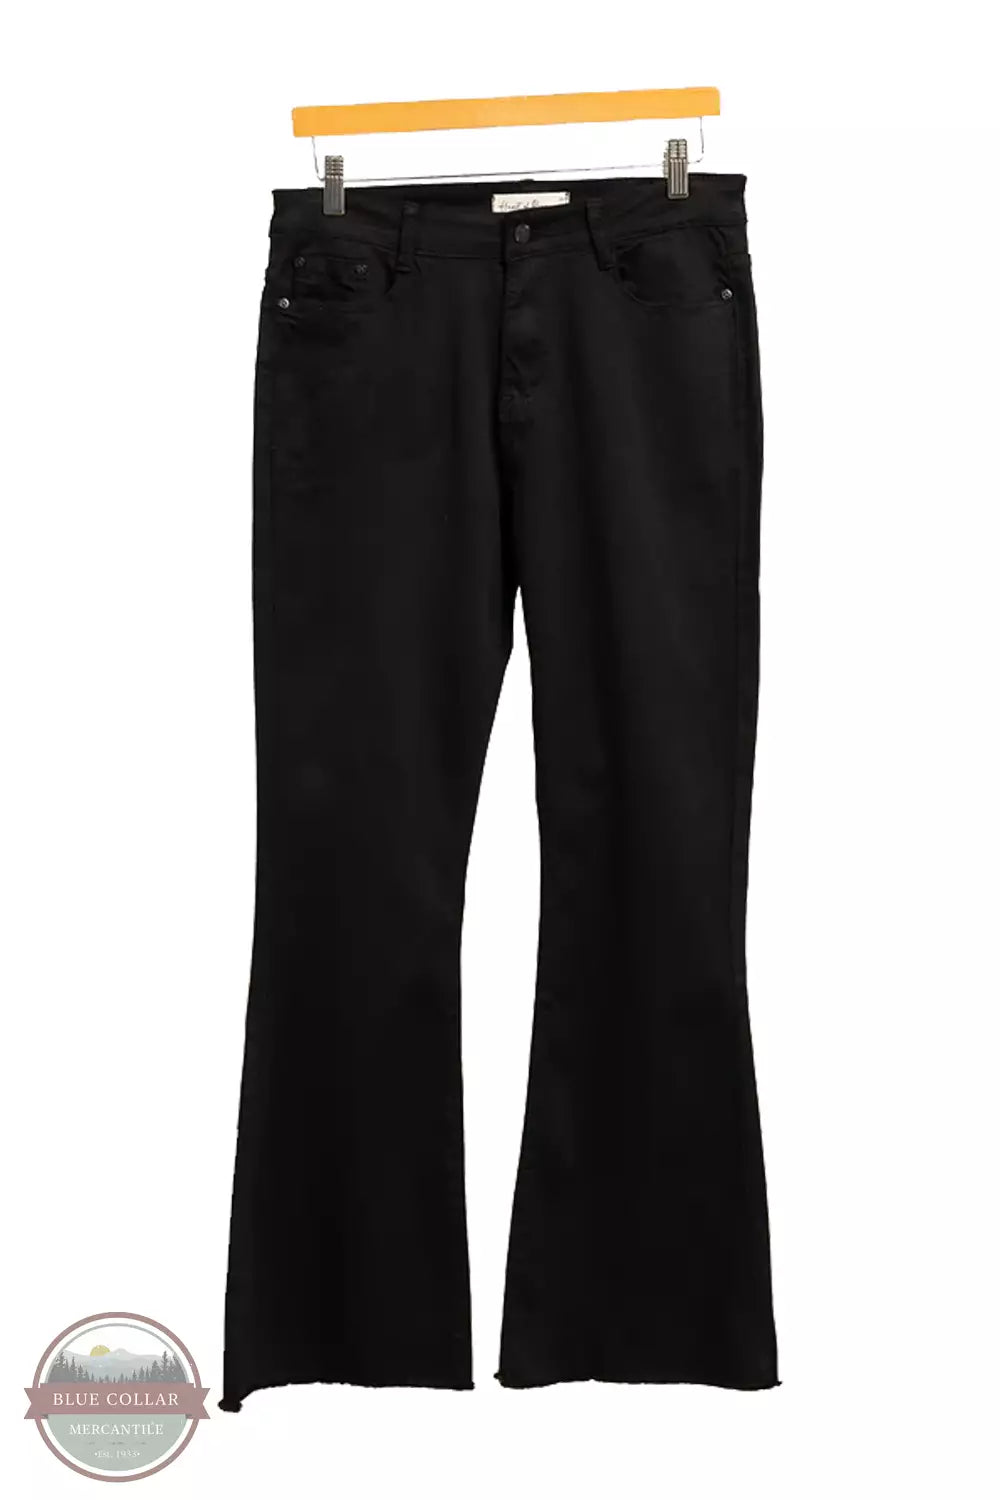 Heart of Pine PLHOP0002 Sateen Stretch Flare Jeans Black Front View